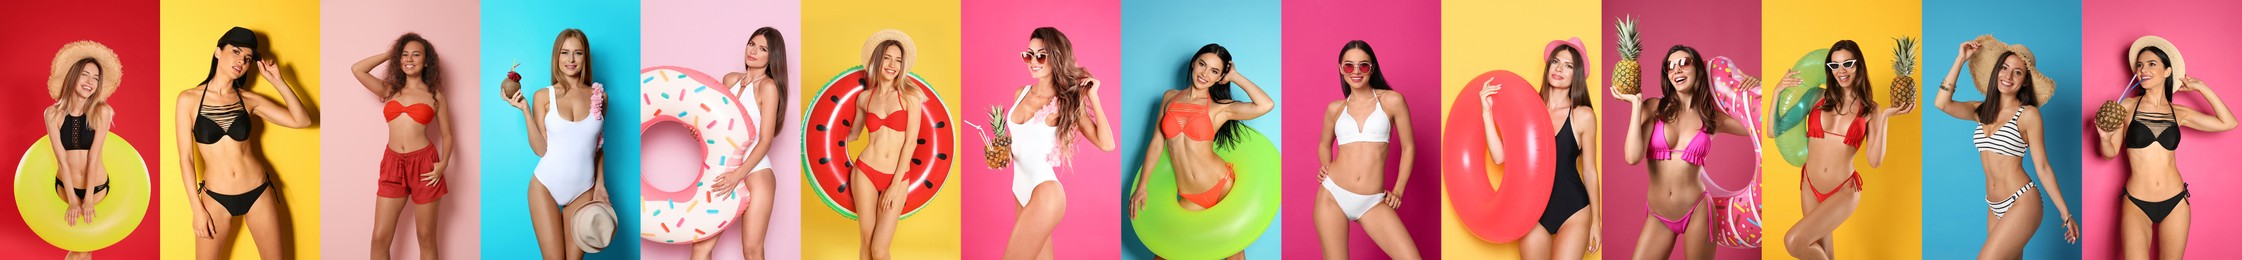 Image of Collage with beautiful photos themed to summer party and vacation. Pretty young women wearing swimsuits on different color backgrounds, banner design